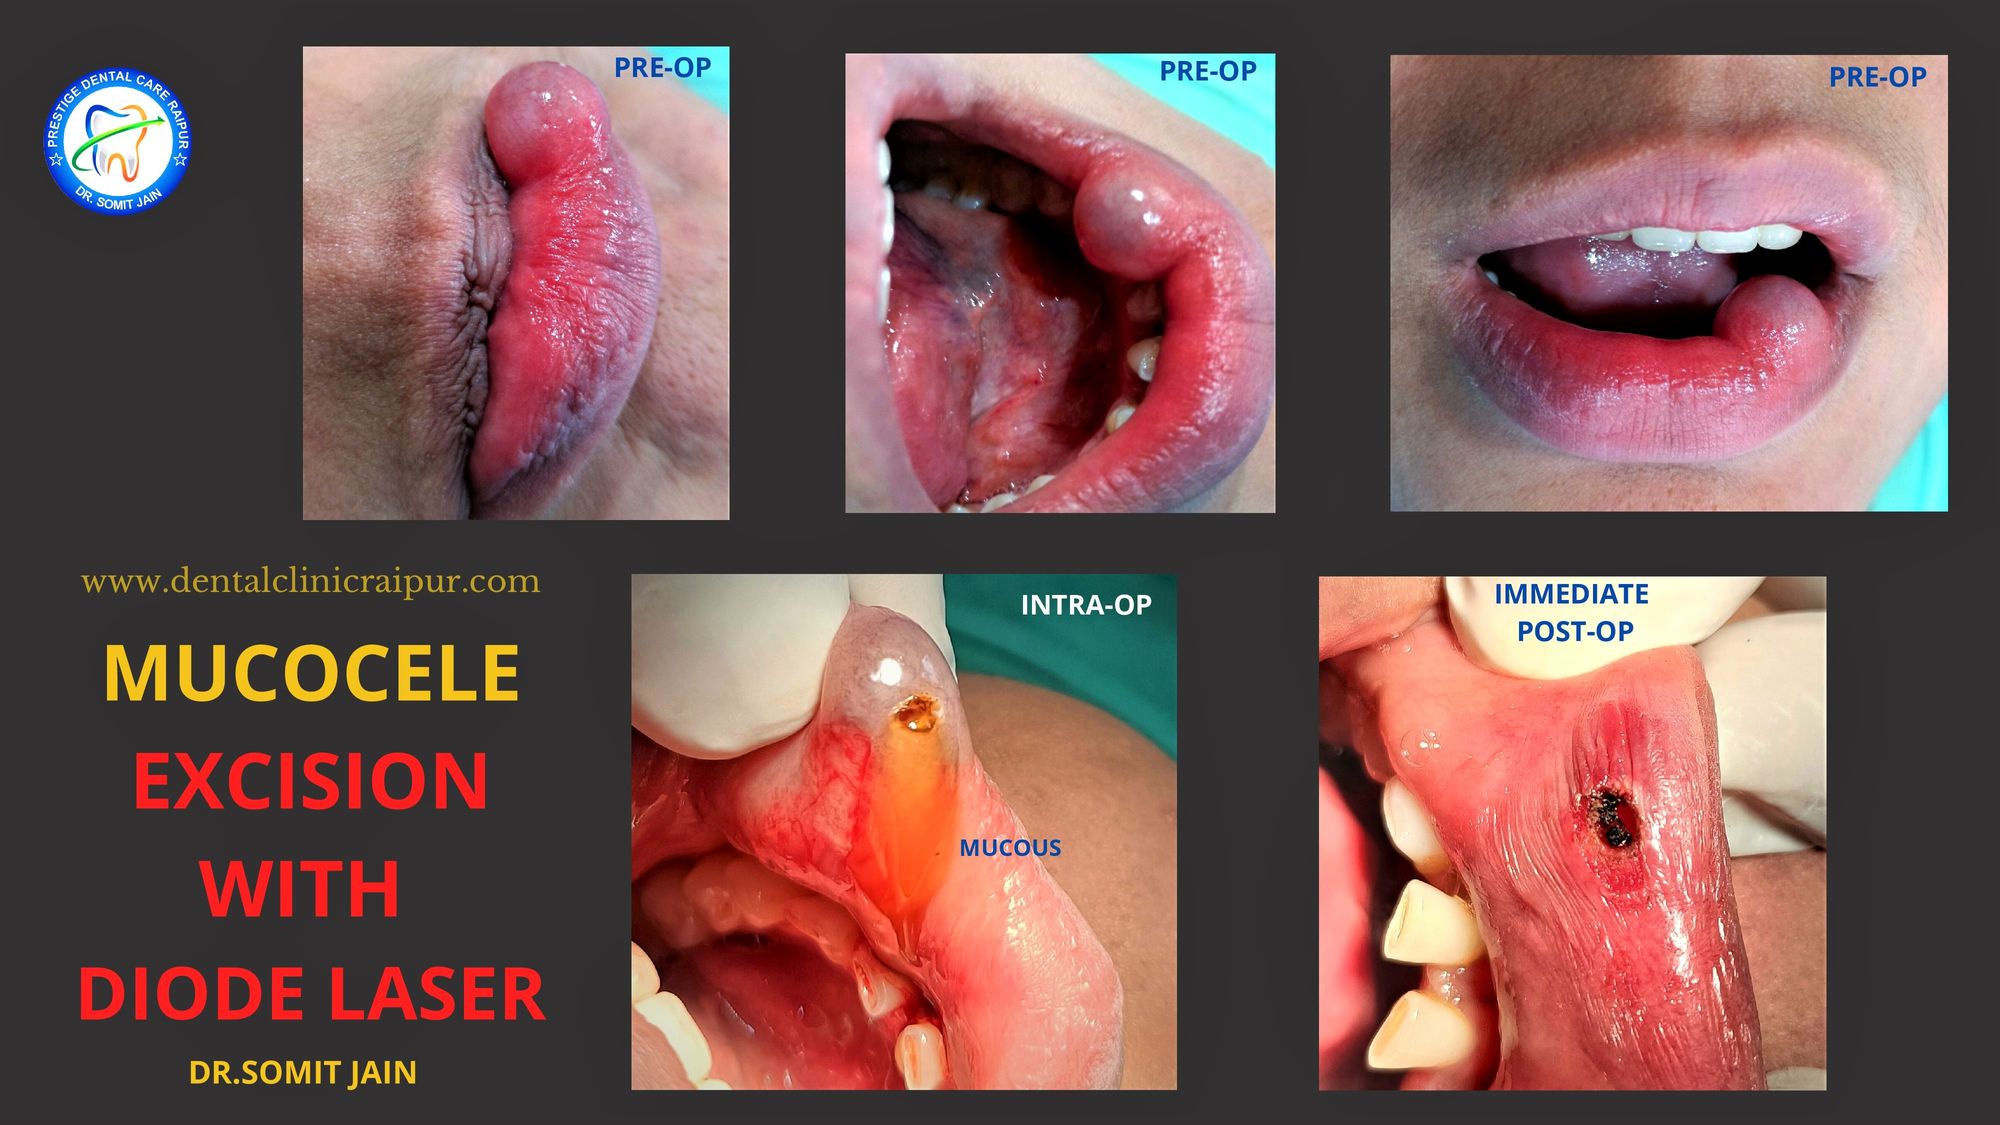 Excision of Mucocele Using Diode Laser in Lower Lip